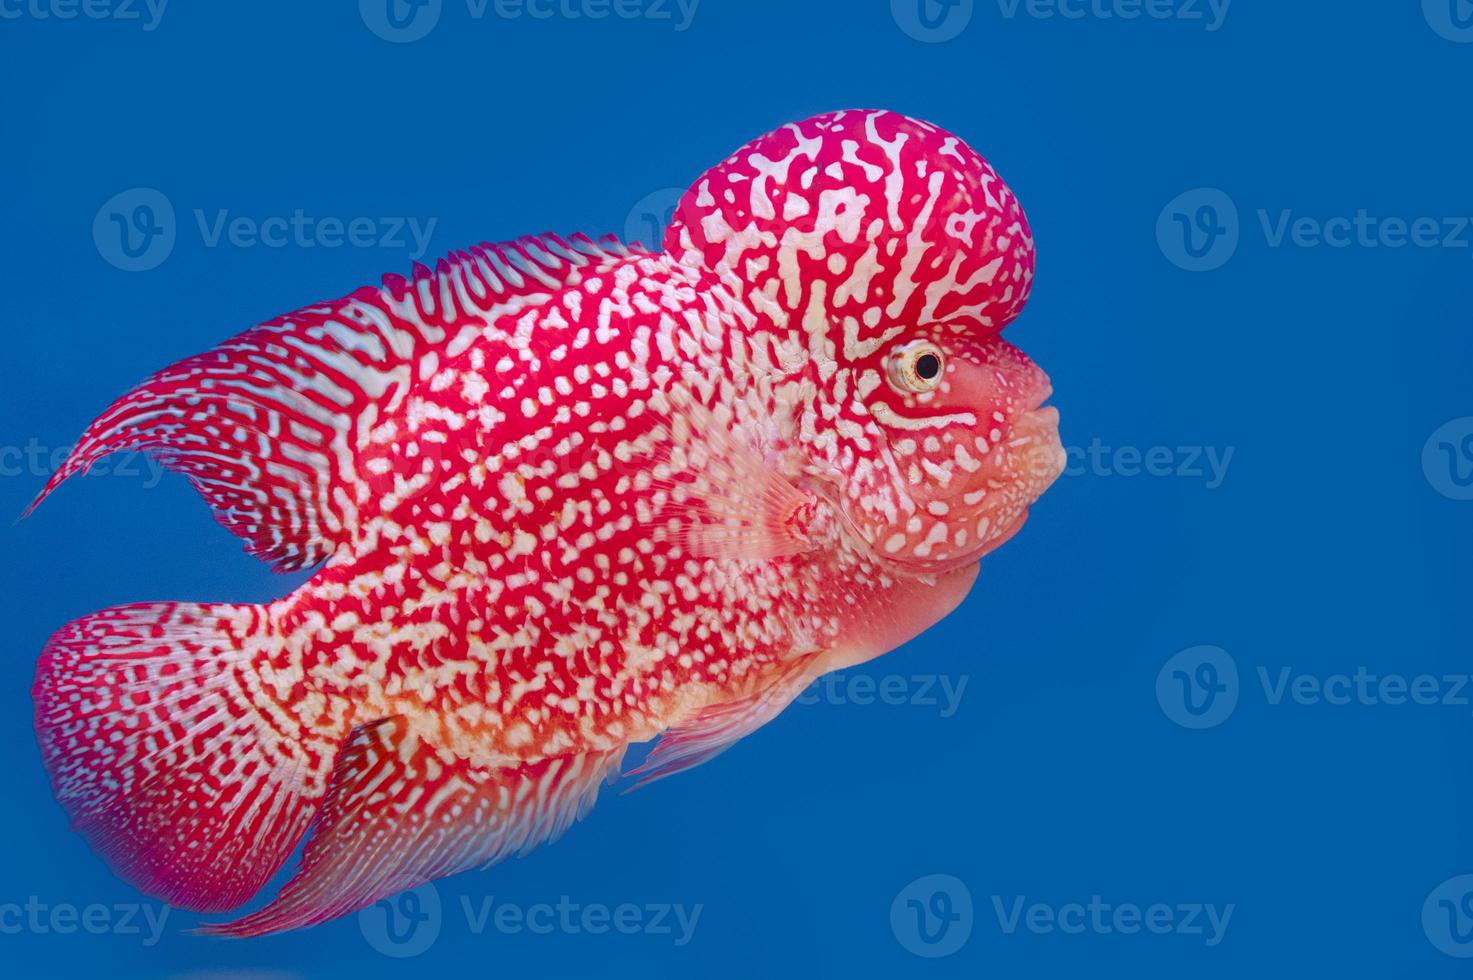 Flowerhorn Cichlid Care Guide  Species Overview  Fishkeeping World